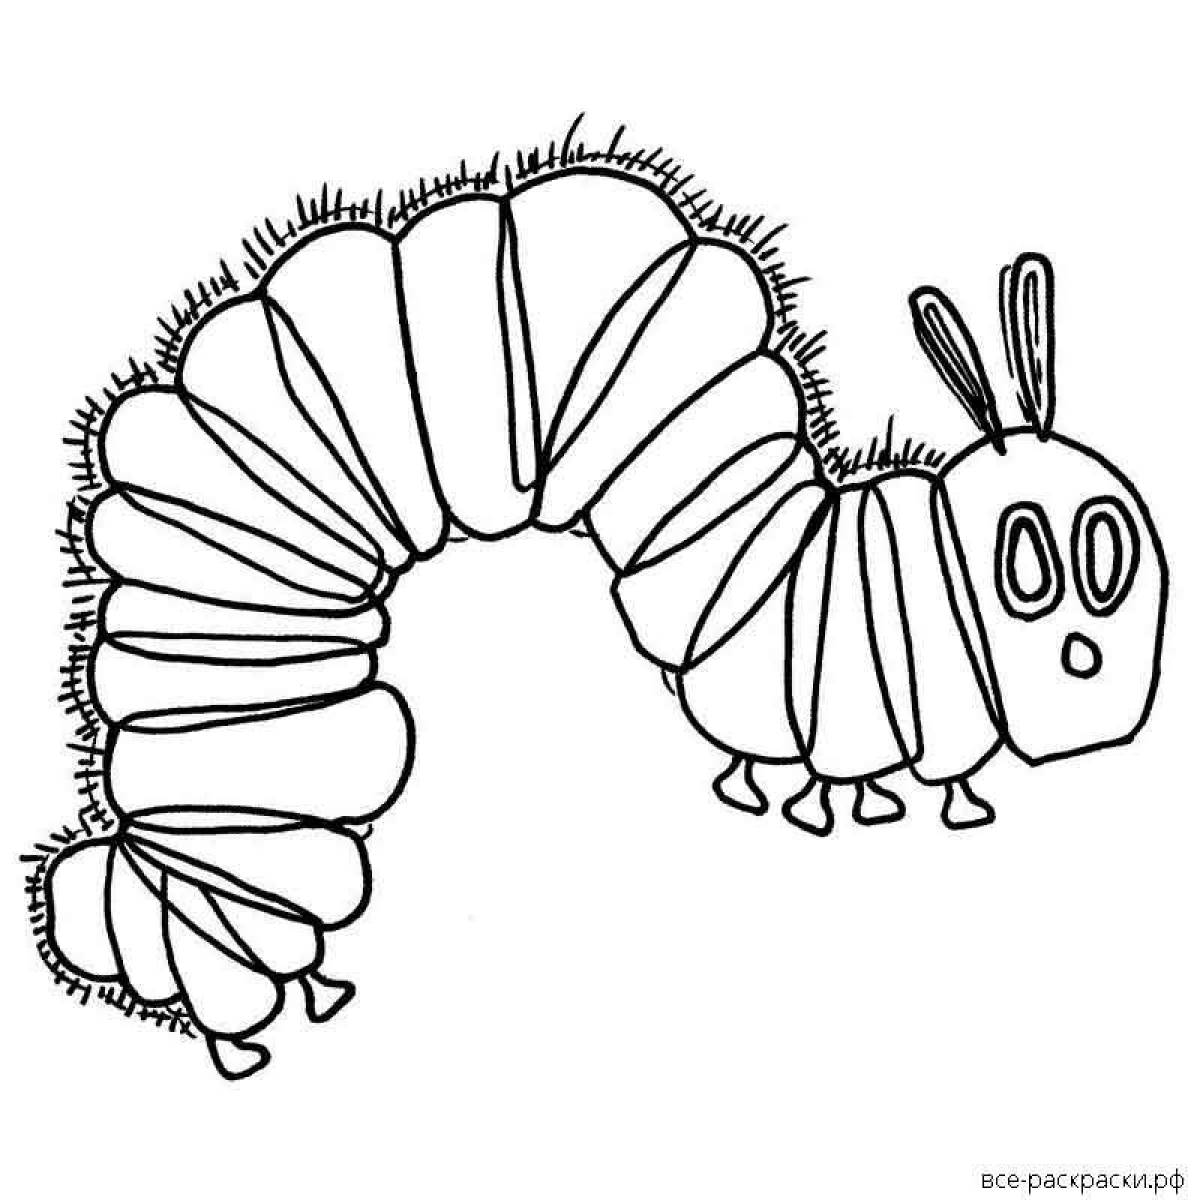 Glittering Pug caterpillar coloring page